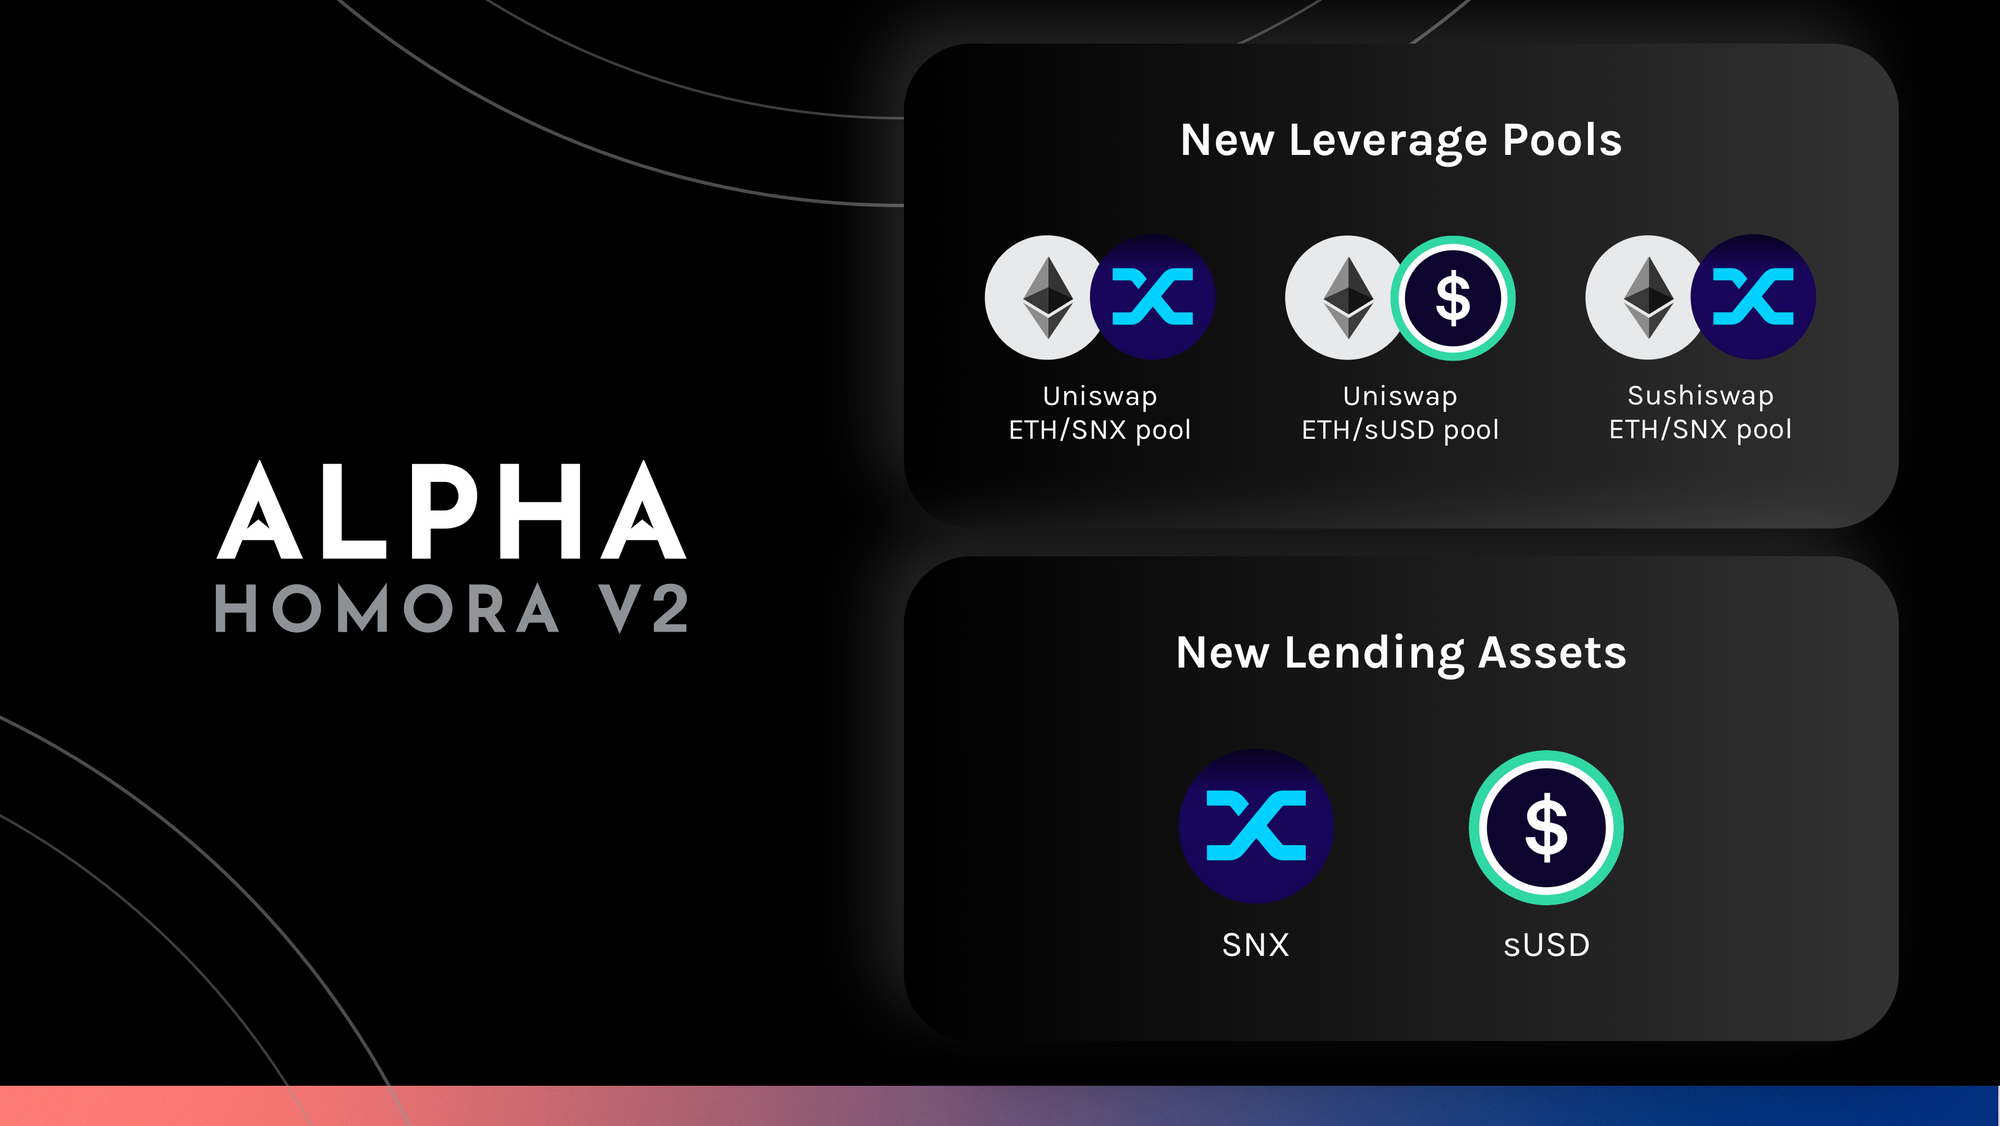 Alpha Homora V2 Adds Leveraged ETH/SNX and ETH/sUSD Pools + Lending of SNX and sUSD Tokens